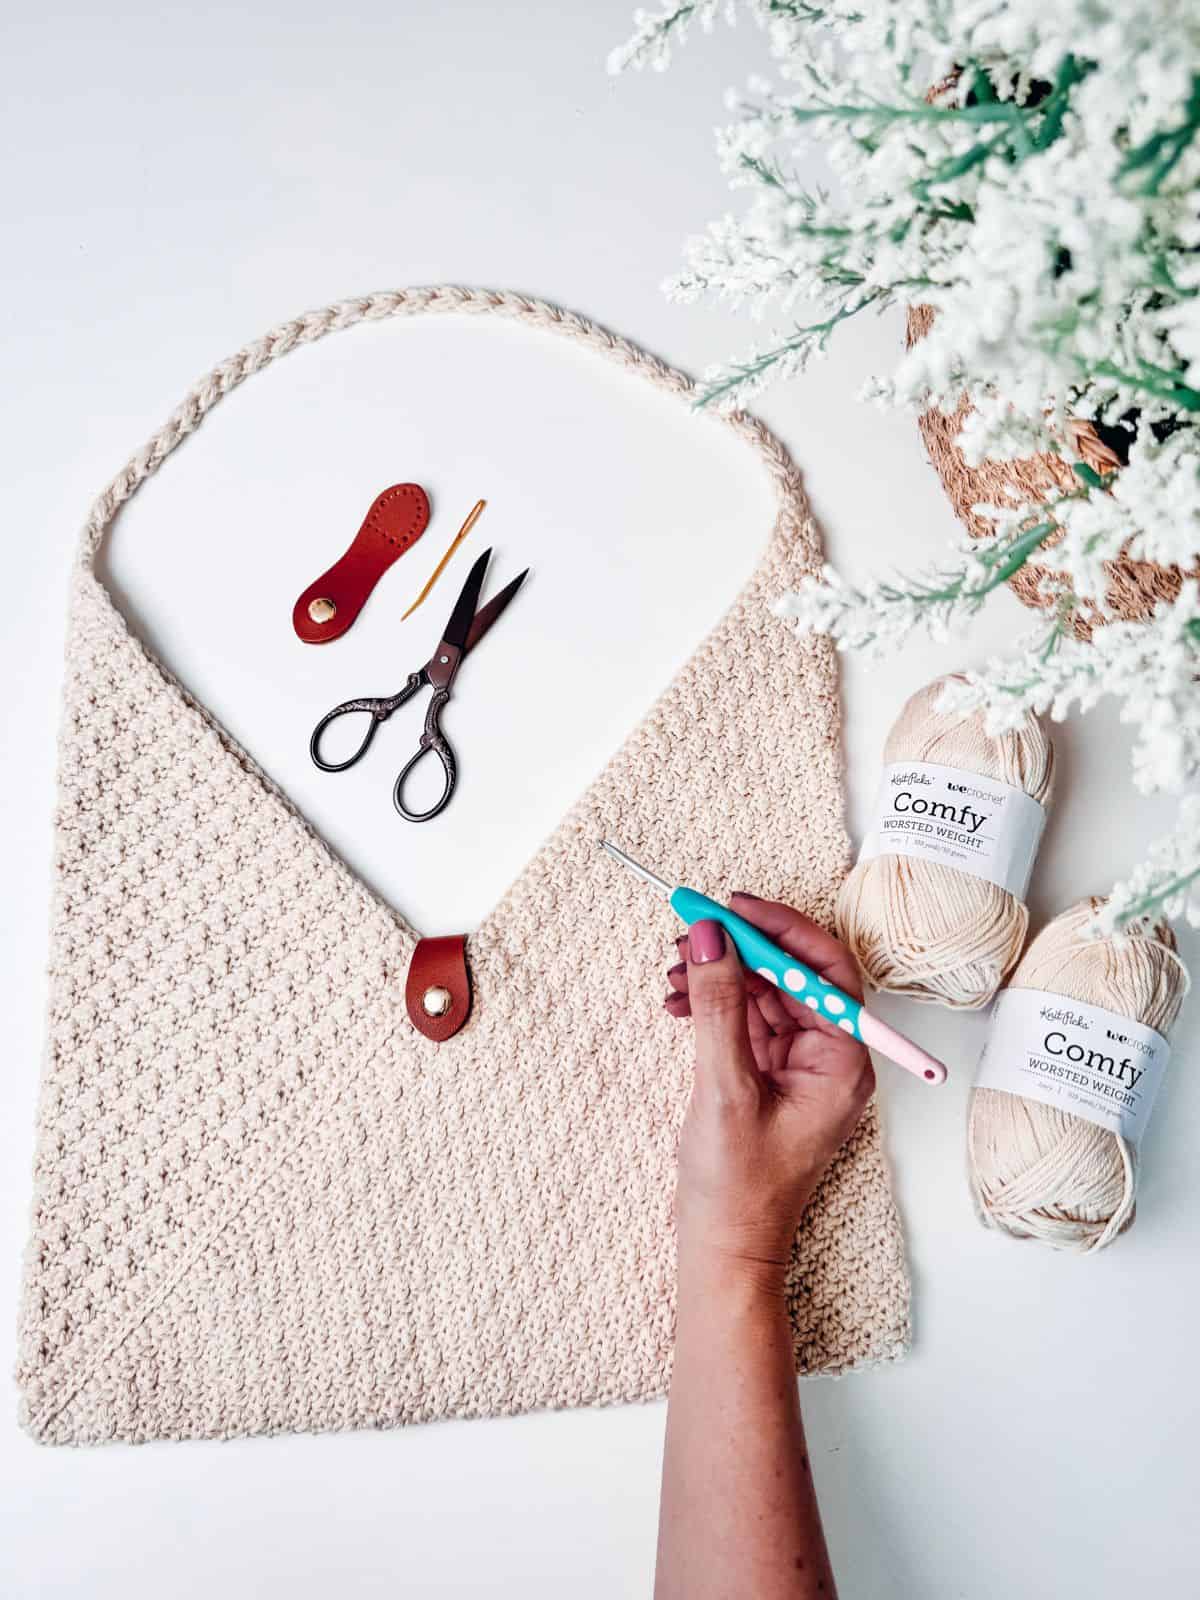 A person is crocheting with beige yarn next to a crocheted envelope-style bag, a pair of scissors, a crochet hook, and crochet tools on a white surface, with white flowers in the background.